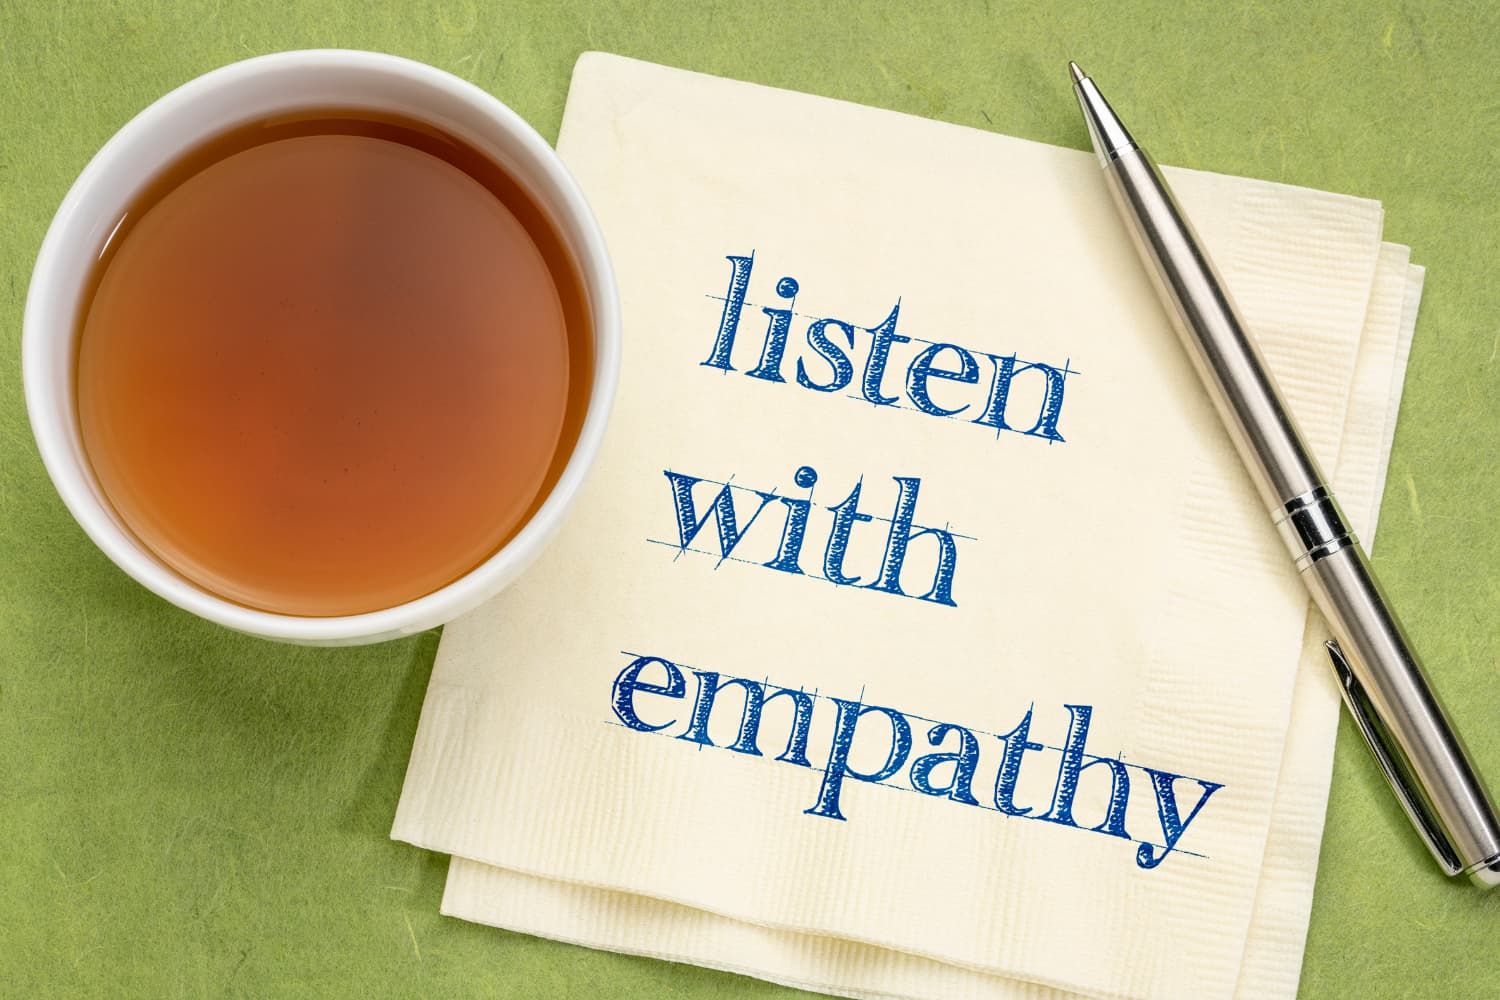 Explore empathy as a tool to engage non-interested children in your ministry, focusing on understanding their world, encouraging open communication, and taking responsive actions.